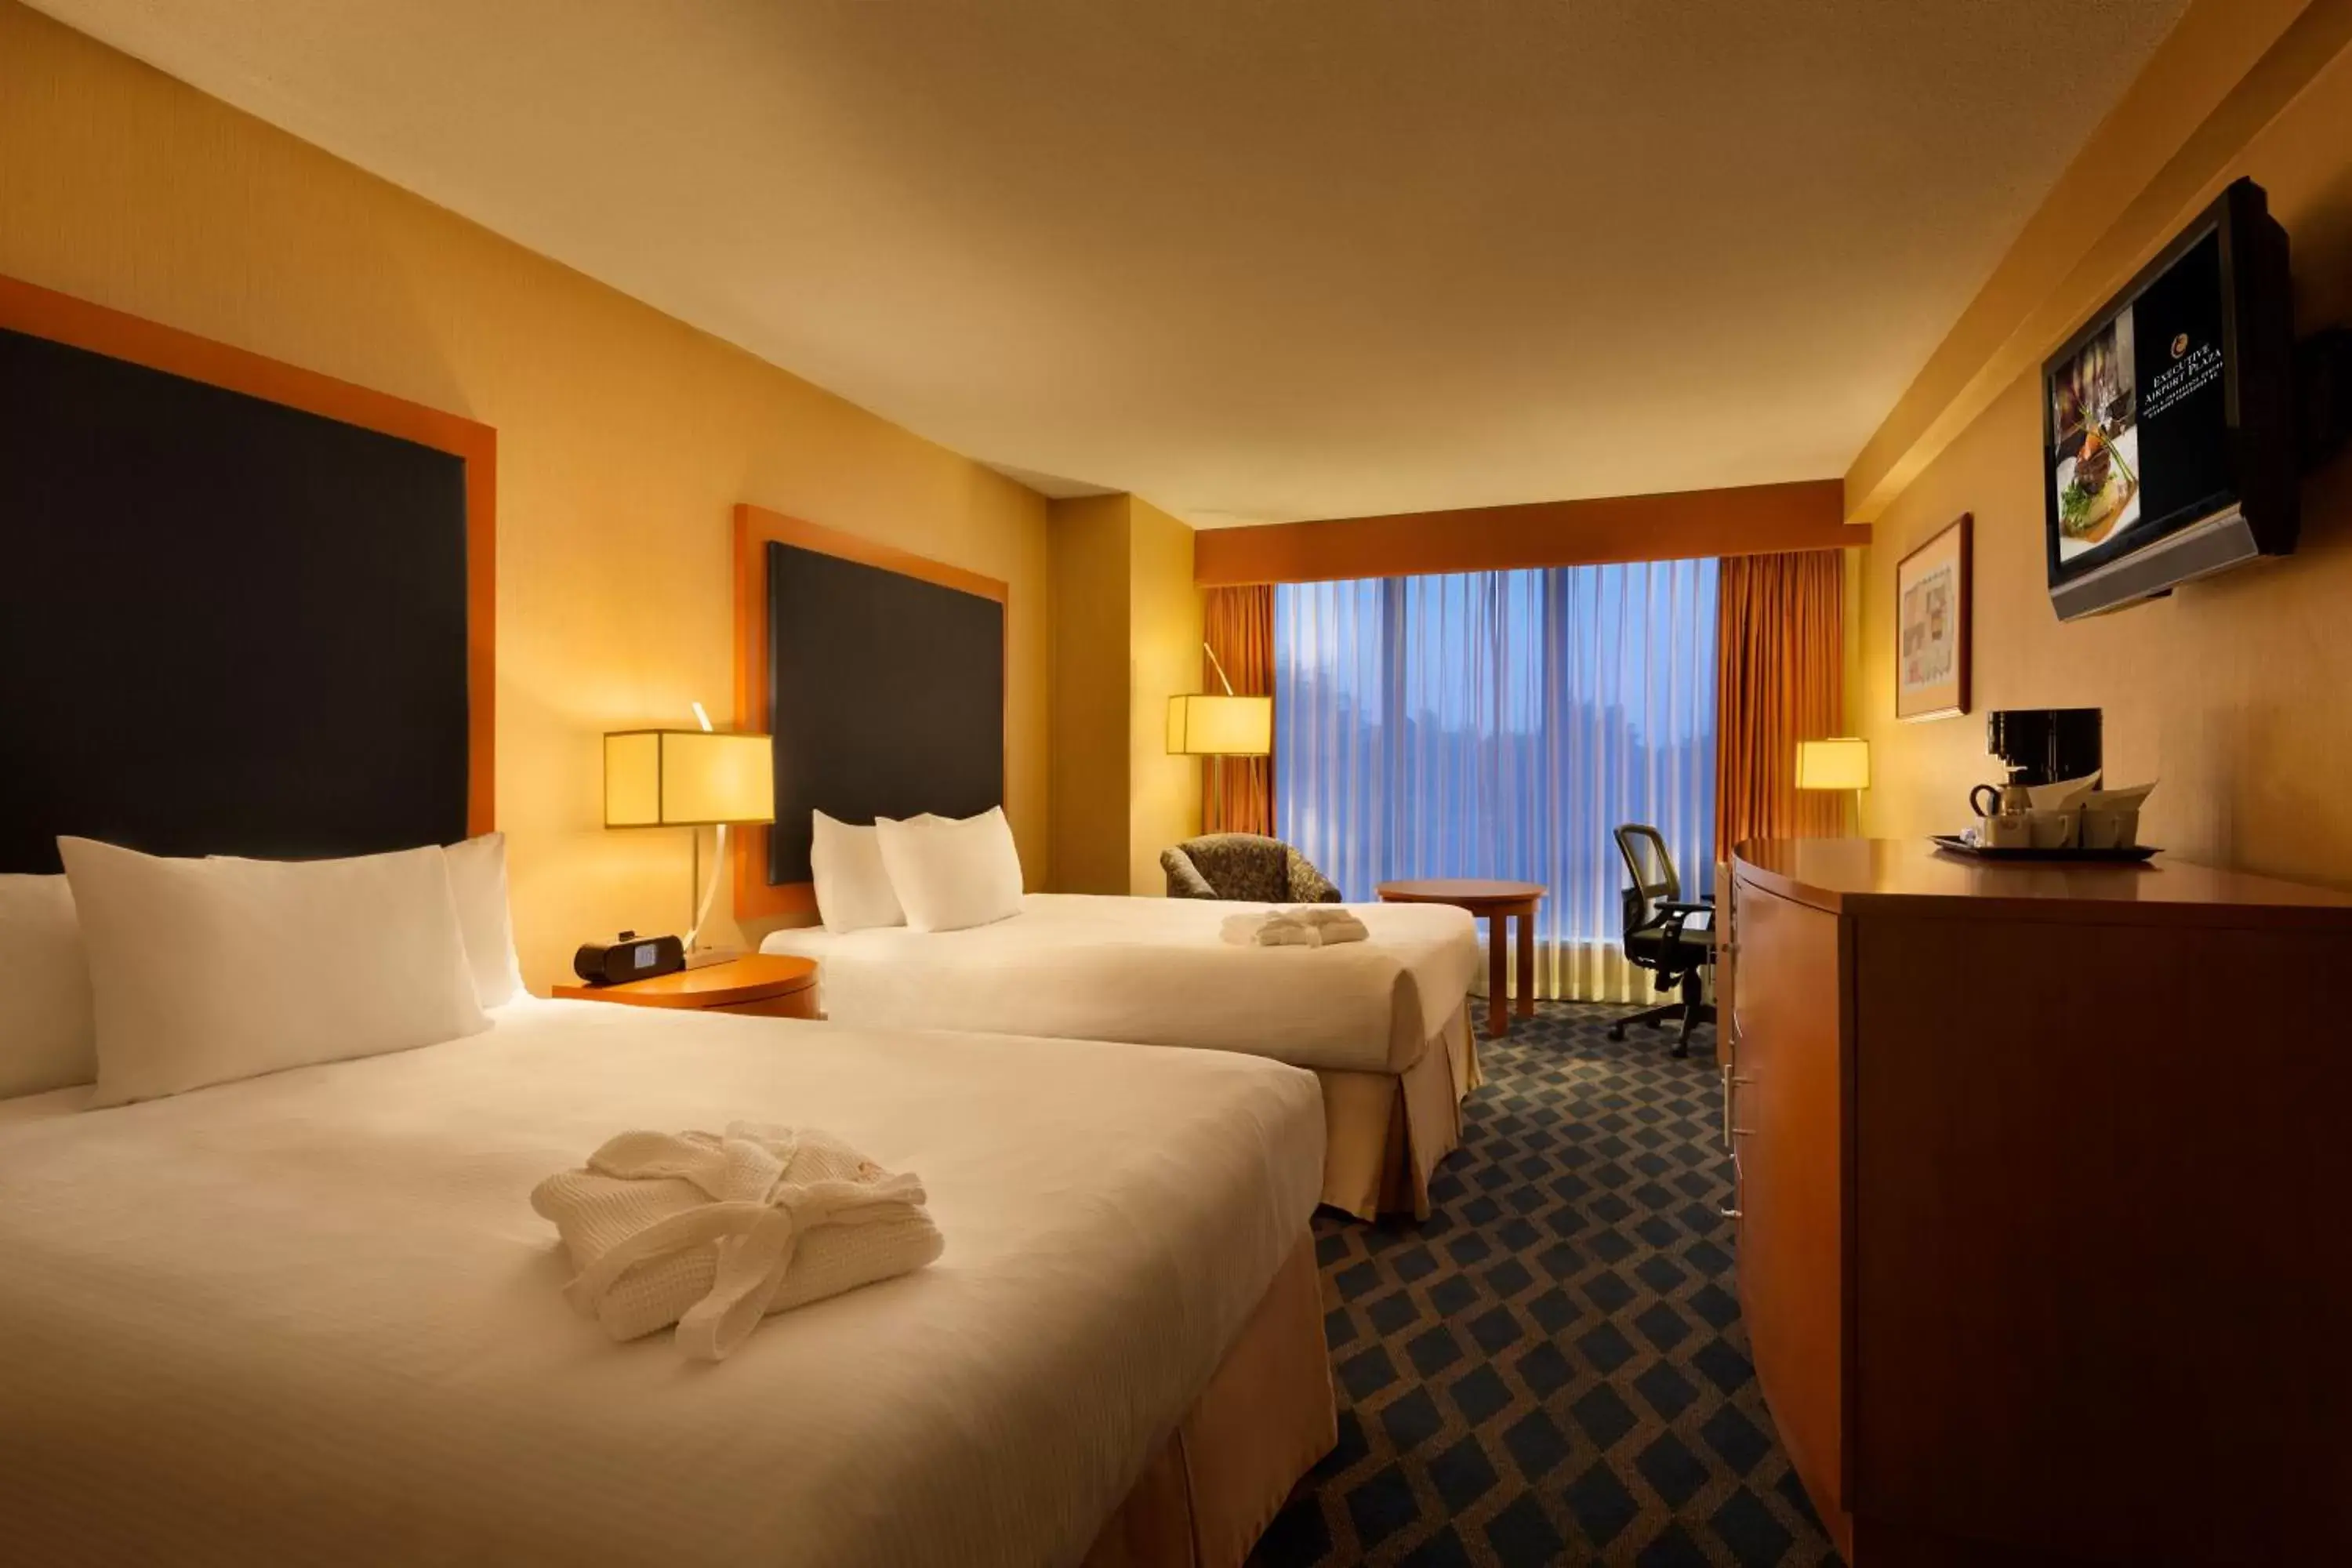 Executive Hotel Vancouver Airport